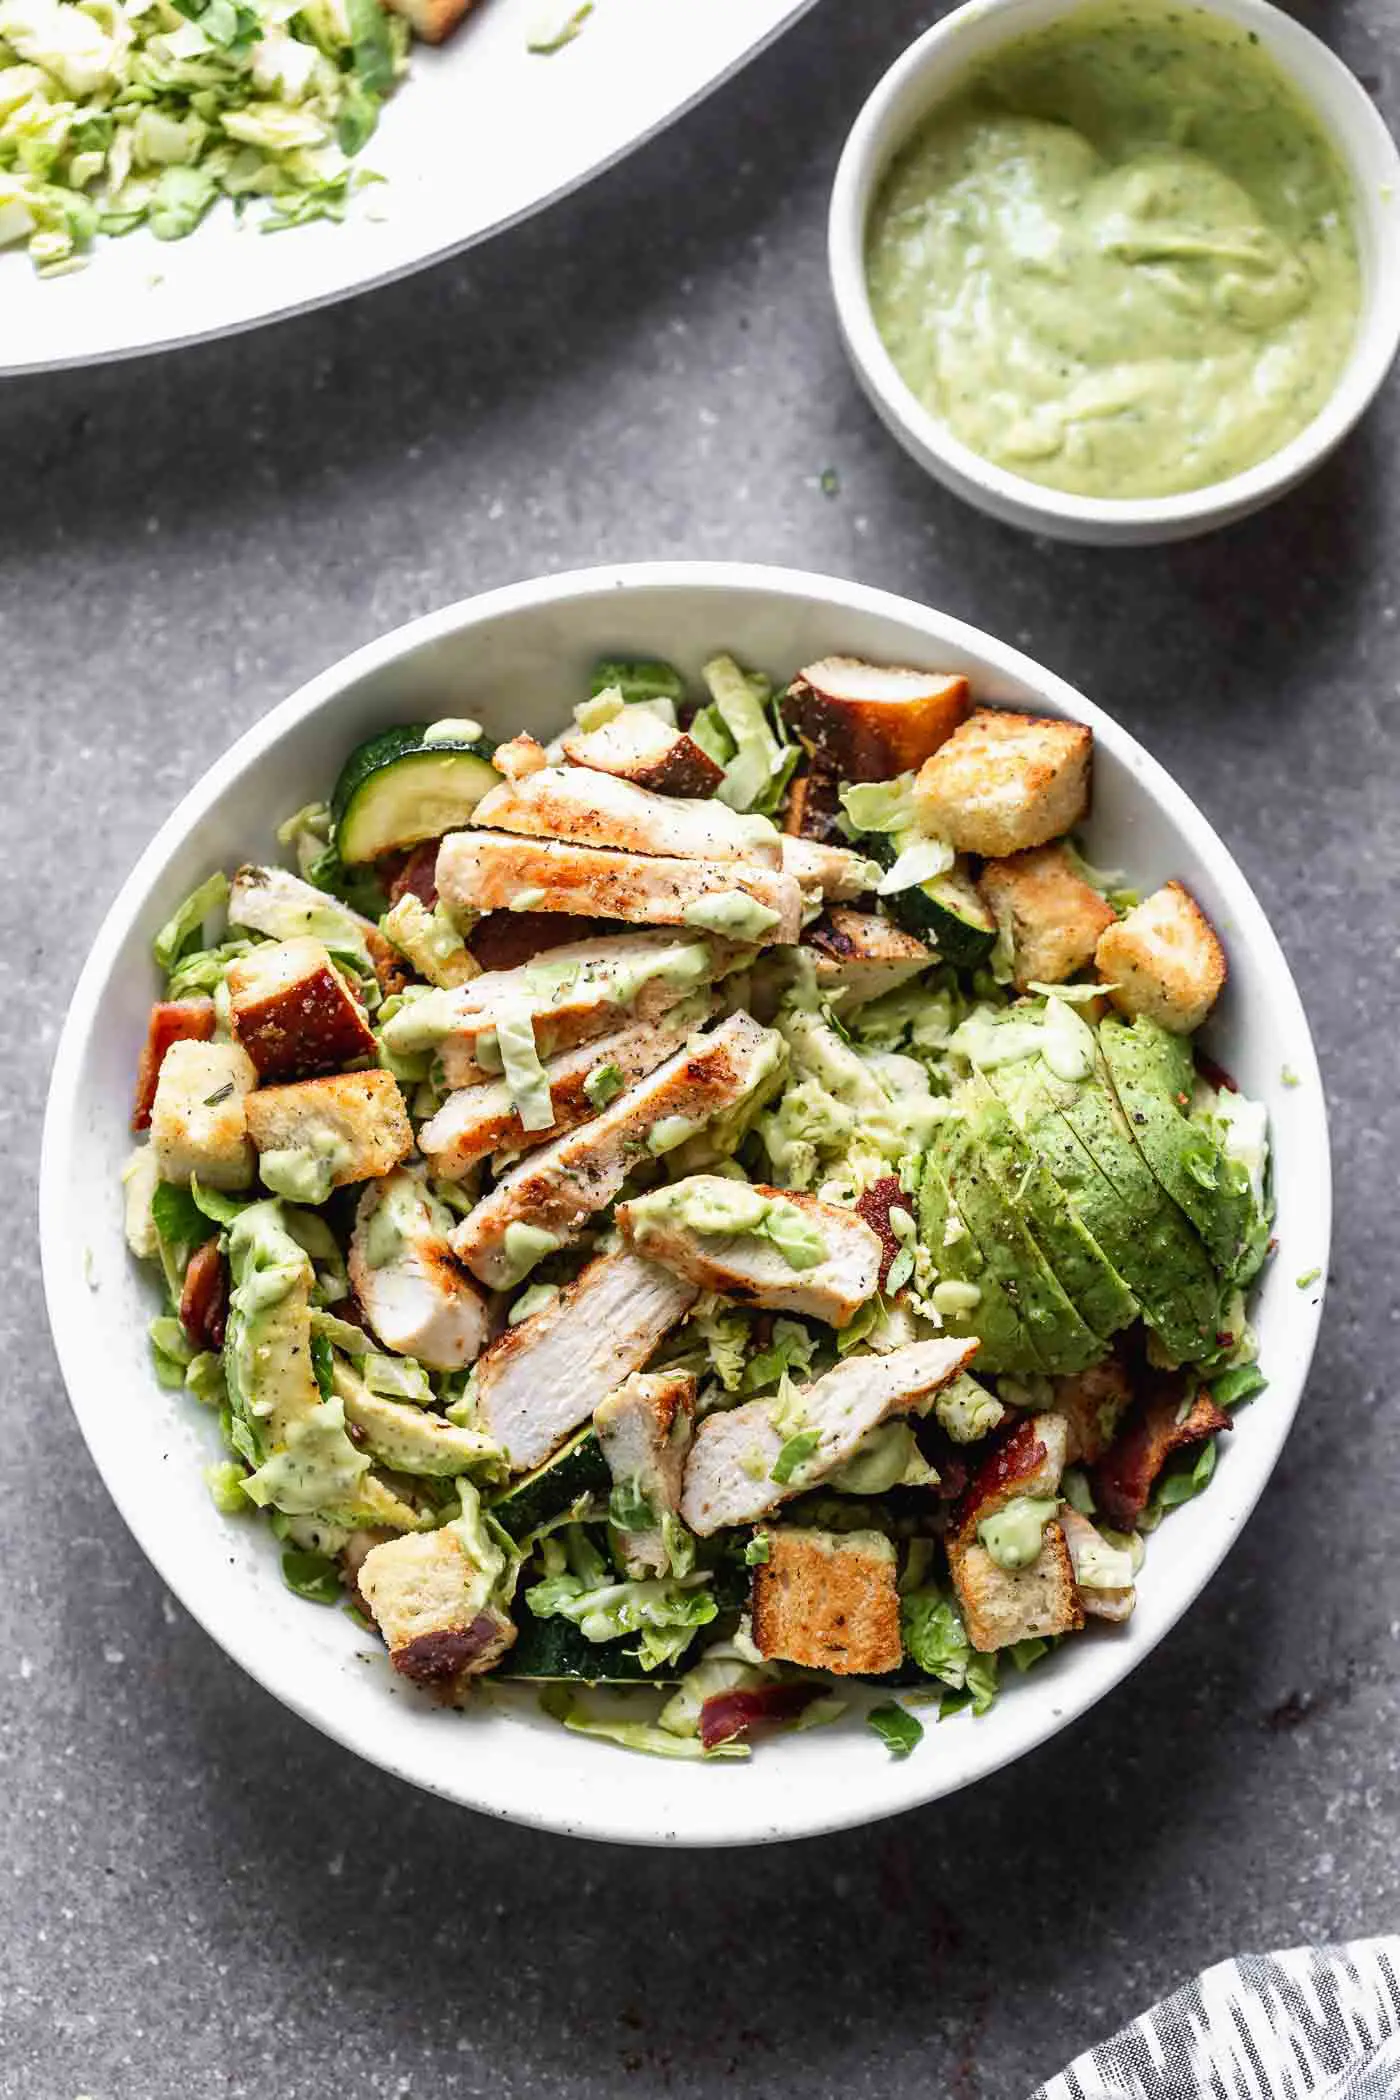 Our Brussels Sprout Green Goddess Salad with Bacon and Grilled&nbsp;Chicken is hearty, healthy, and one of the best salads you'll ever make. We toss shredded&nbsp;Brussels sprouts with grilled zucchini, grilled chicken, crispy bacon, and crunch&nbsp;croutons and then toss everything in an herb-packed dressing you'll want to smother on EVERYTHING.&nbsp;